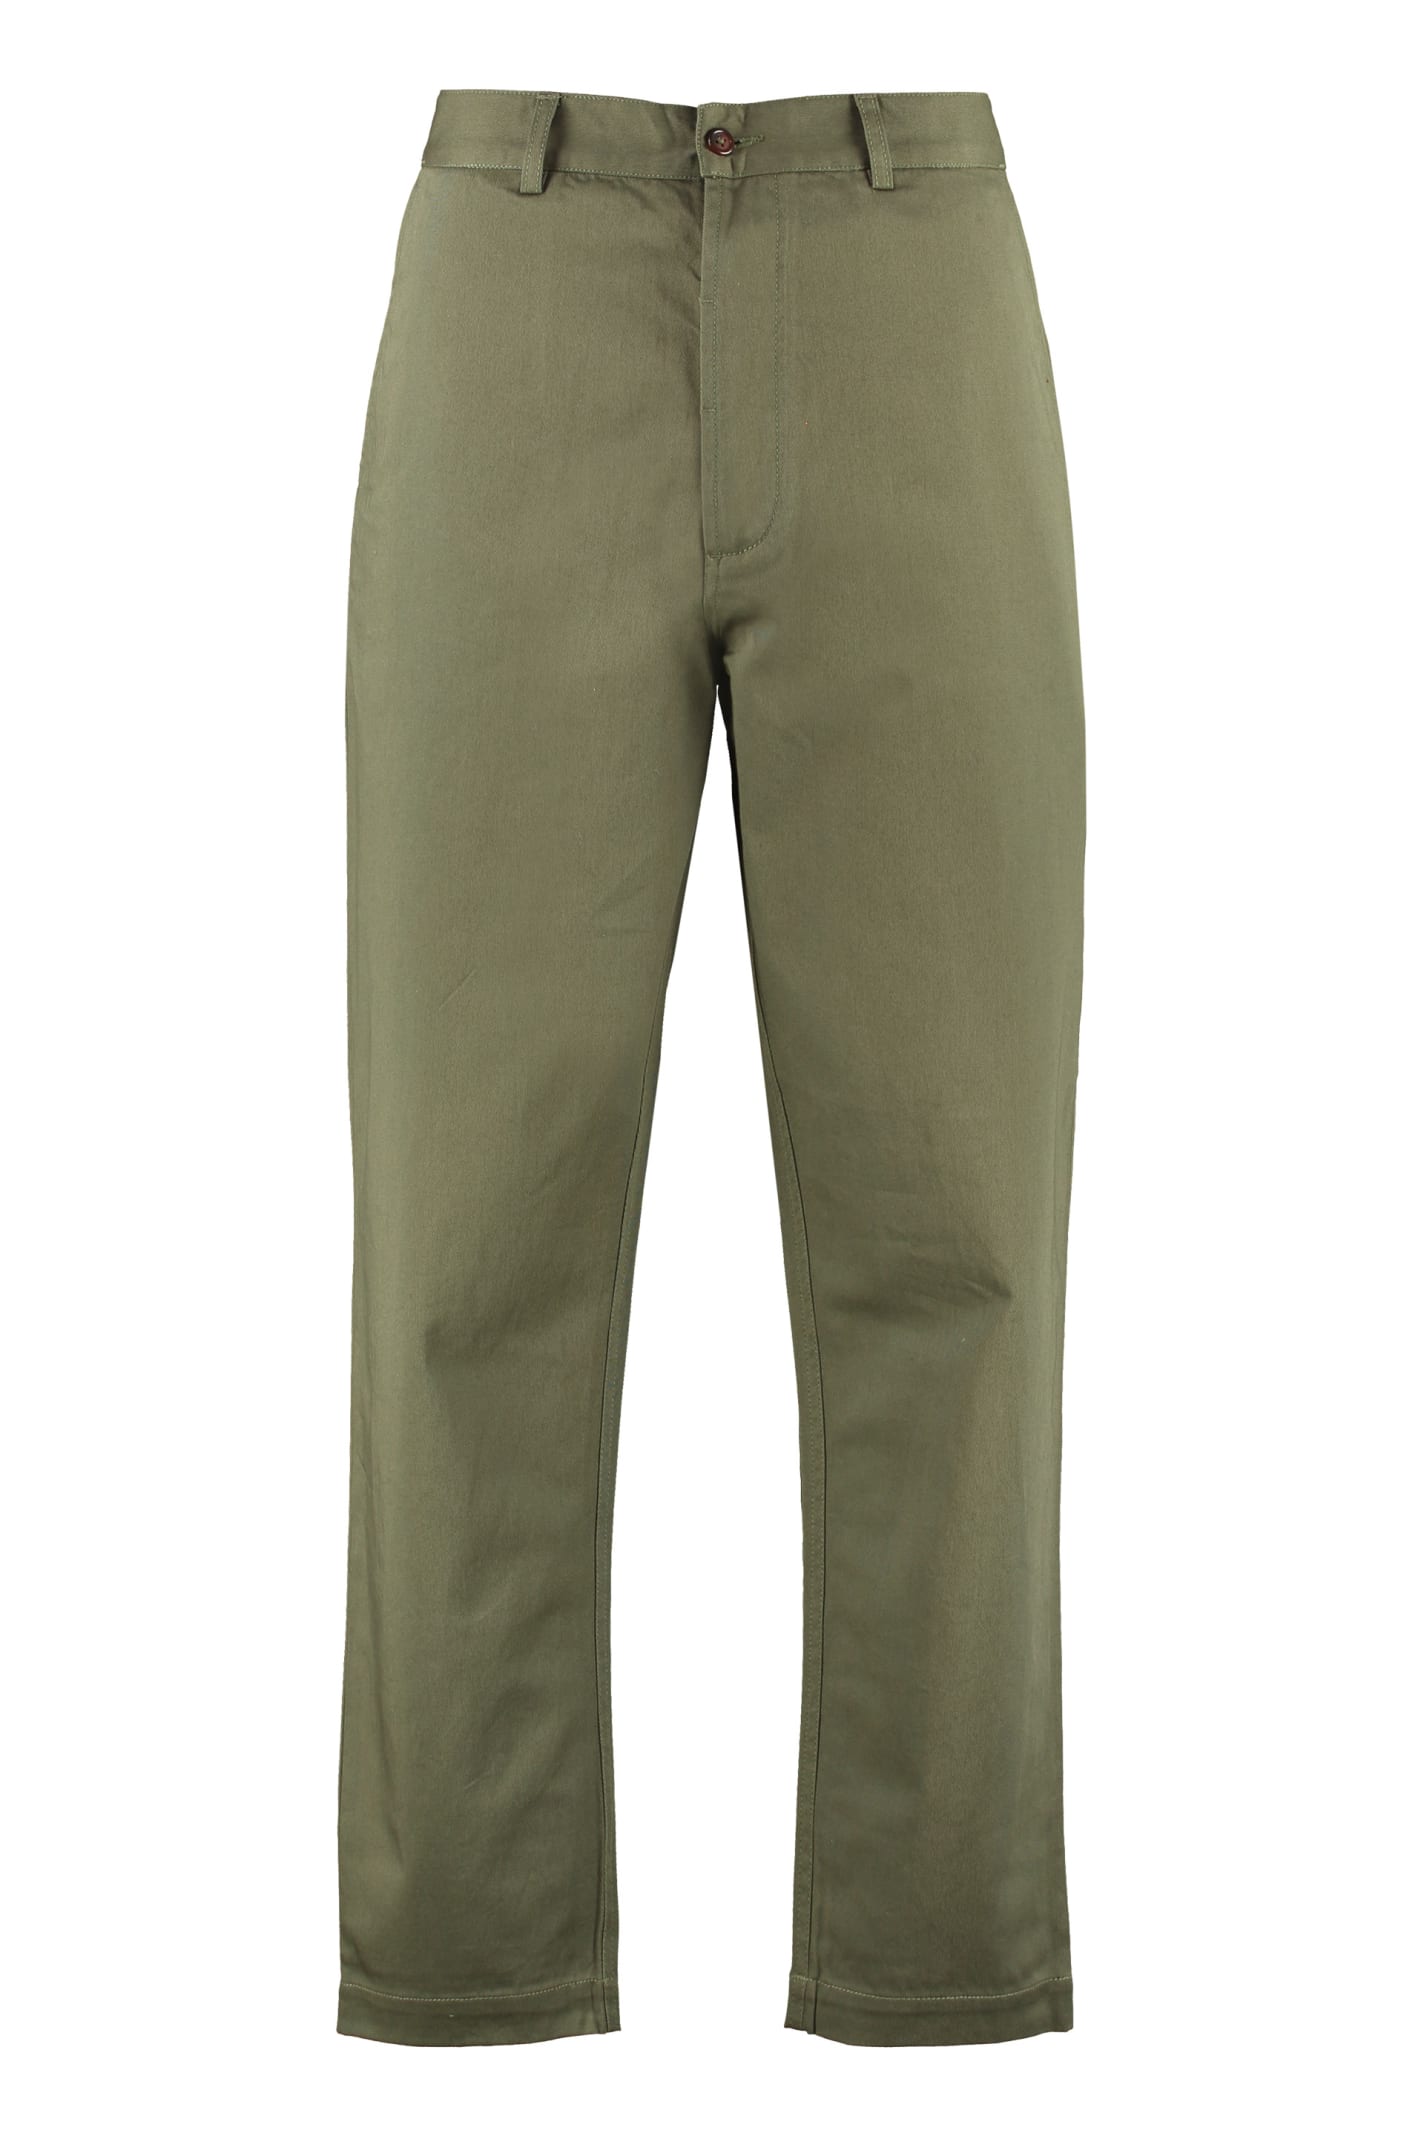 Universal Works Cotton Twill Chino Trousers